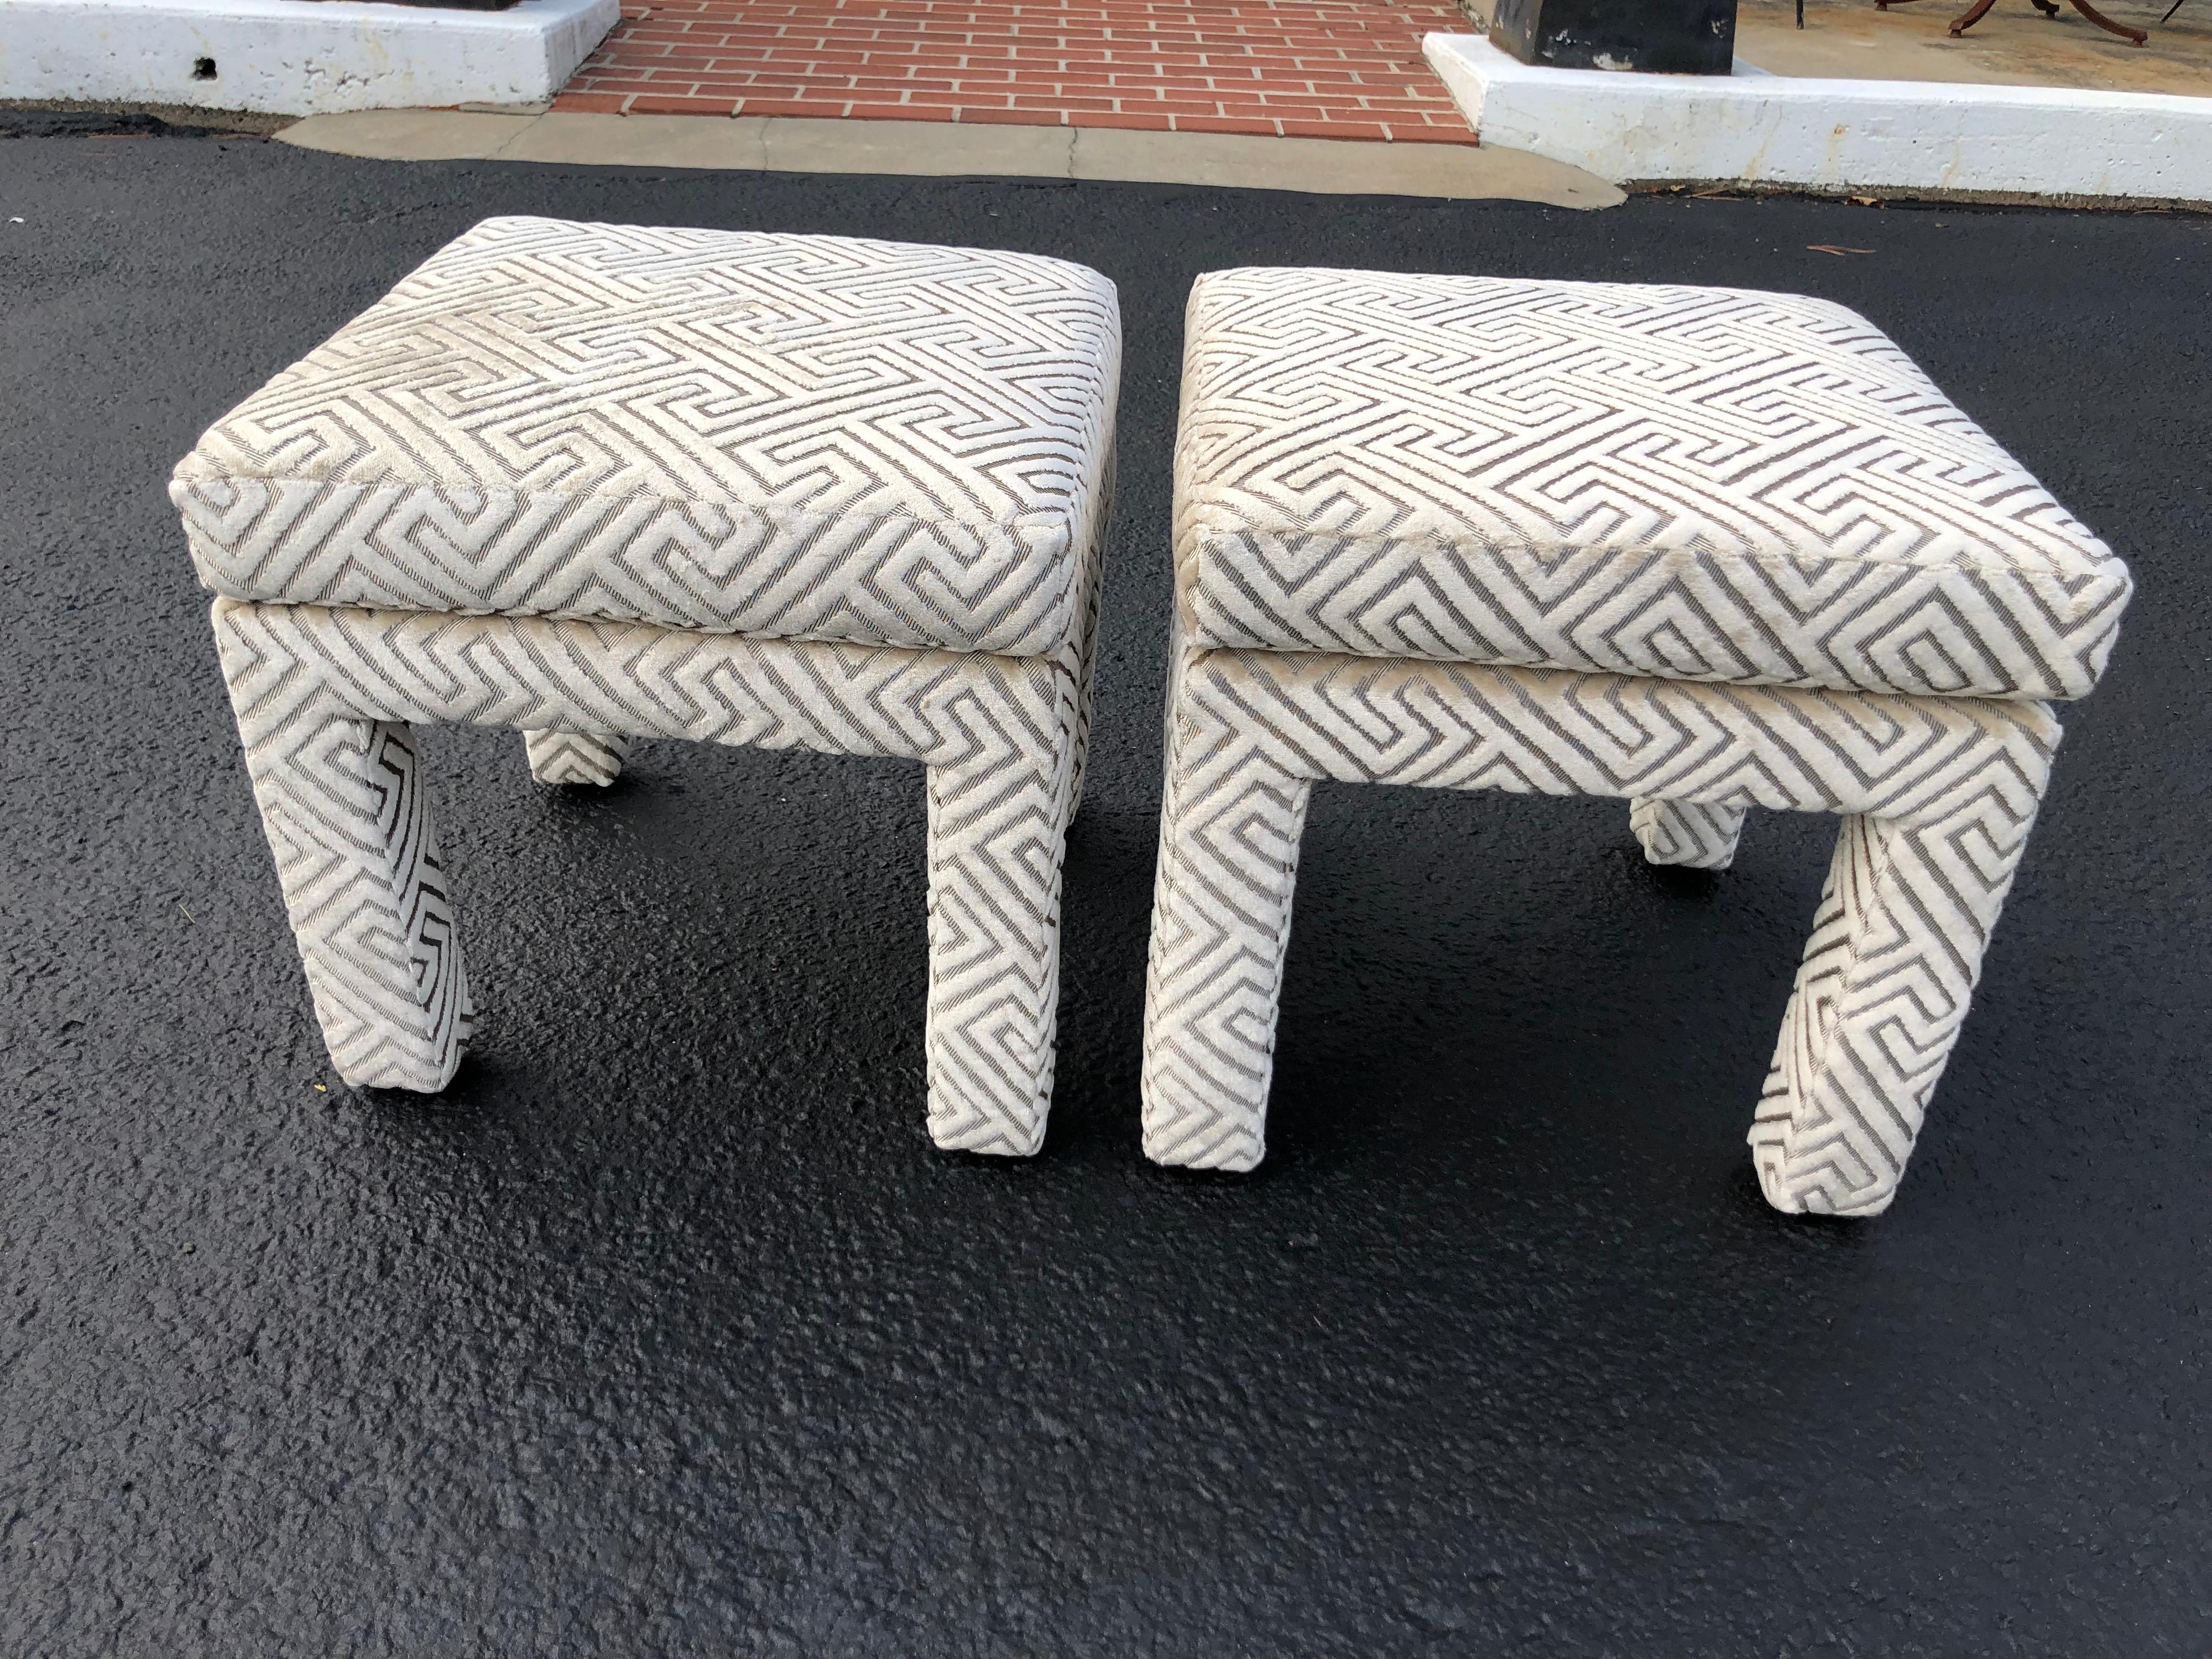 Pair of Mid Century Modern pillow top ottomans in the Parsons design. These are square in shape and newly upholstered. Gorgeous champagne two toned with a geometric design thick velvet- like upholstery. Mint condition. One stool may look darker that